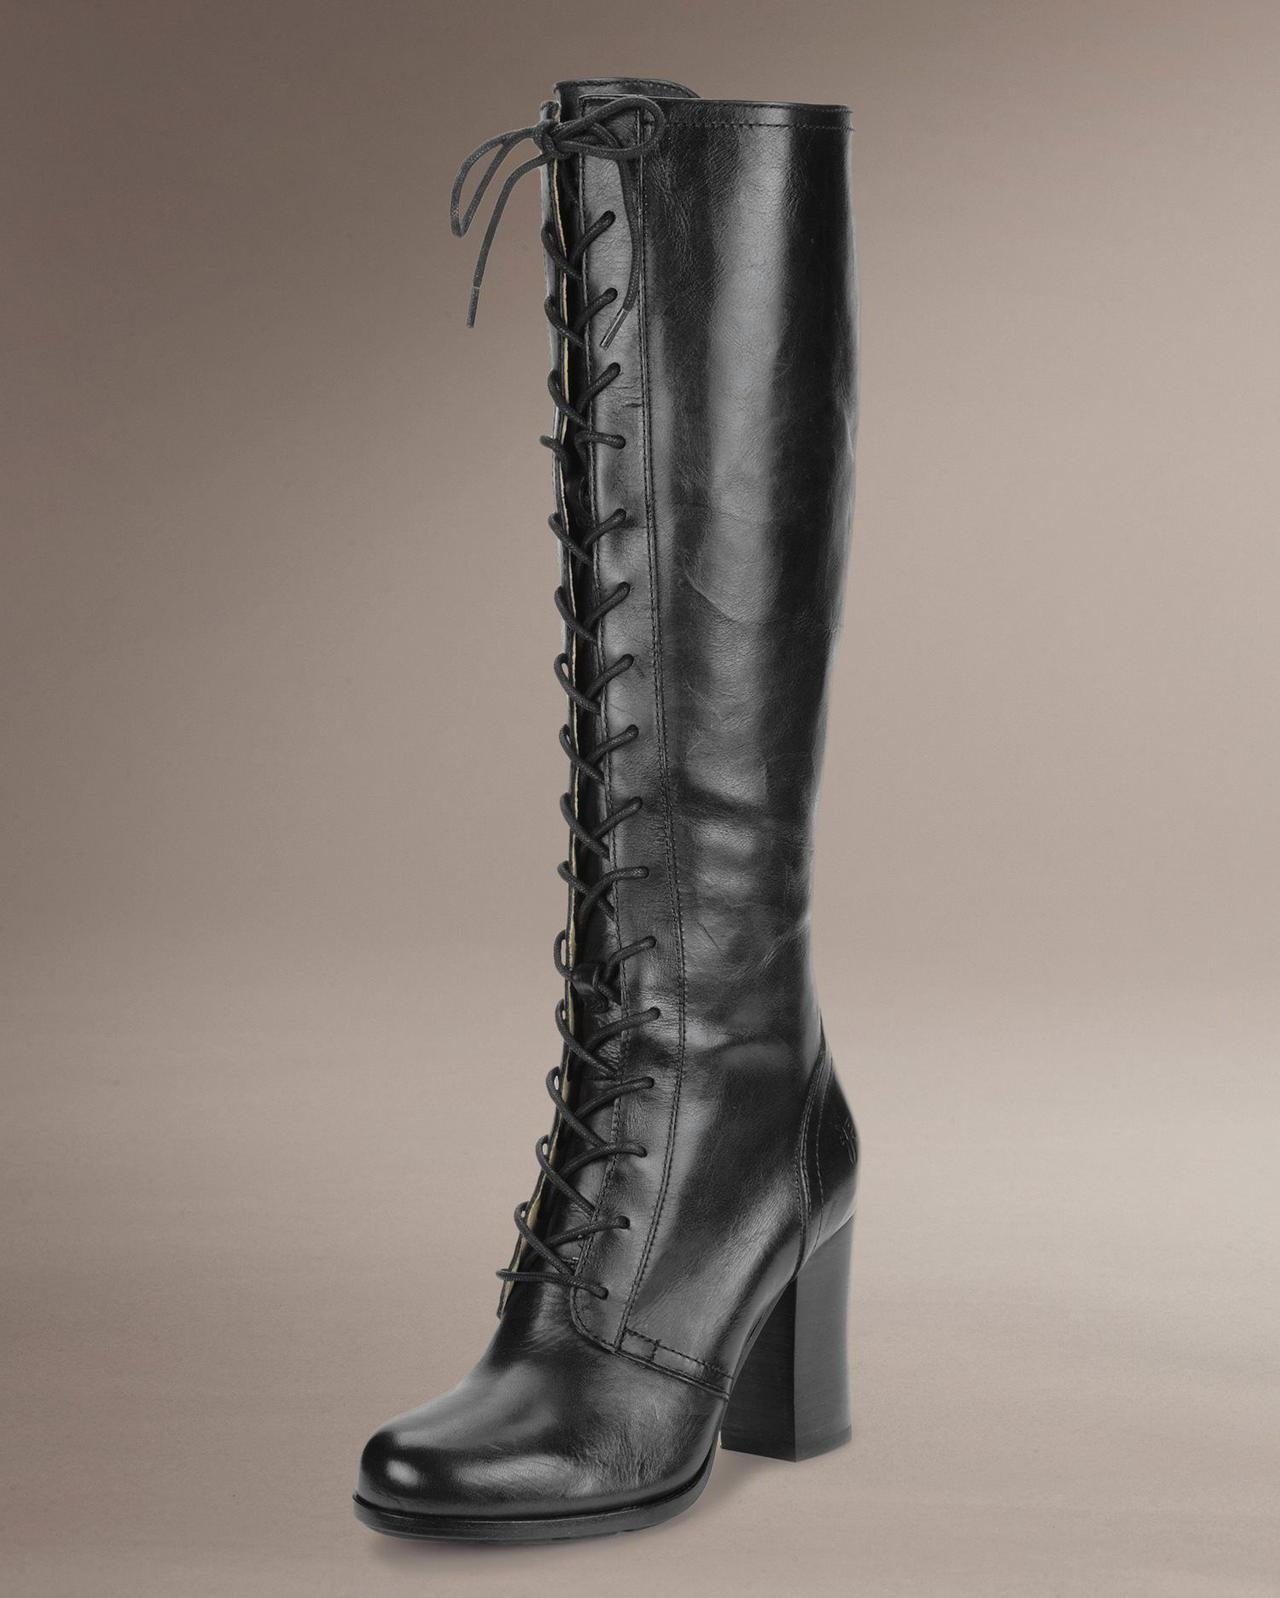 Tall Black Leather Lace Up Boot by CreativeT01 on DeviantArt